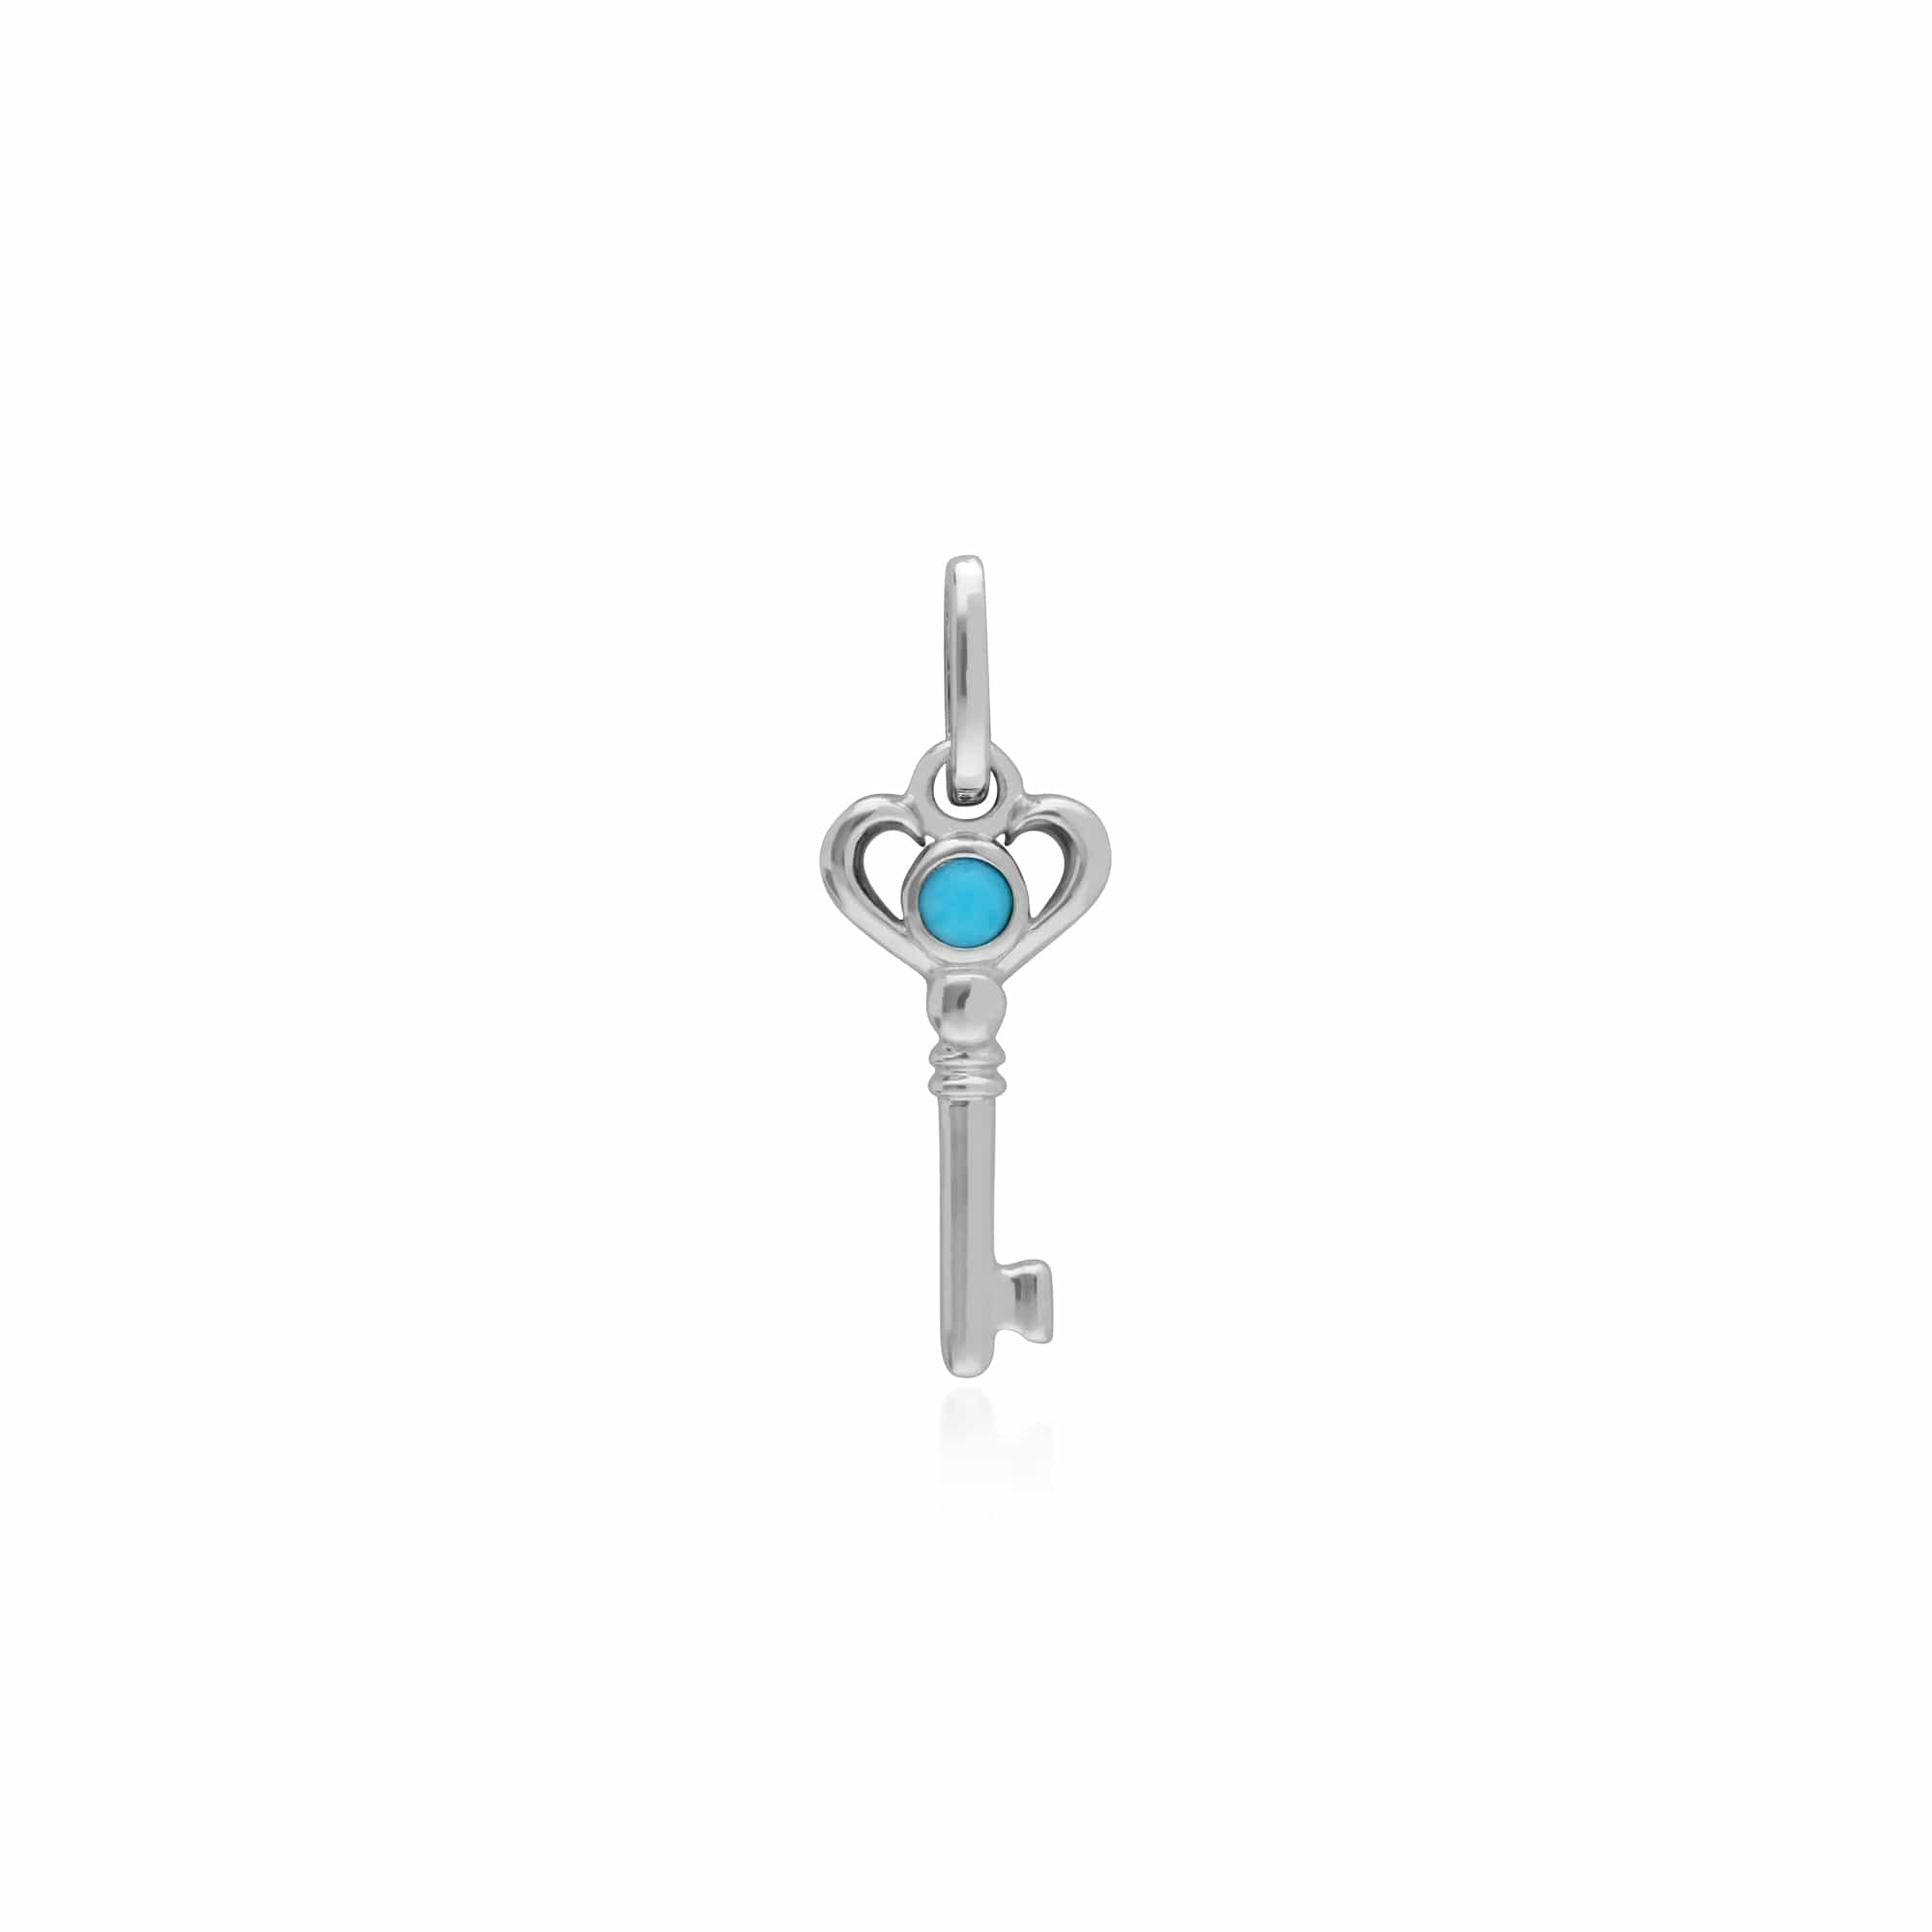 270P028301925-270P027001925 Classic Heart Lock Pendant & Turquoise Key Charm in 925 Sterling Silver 2